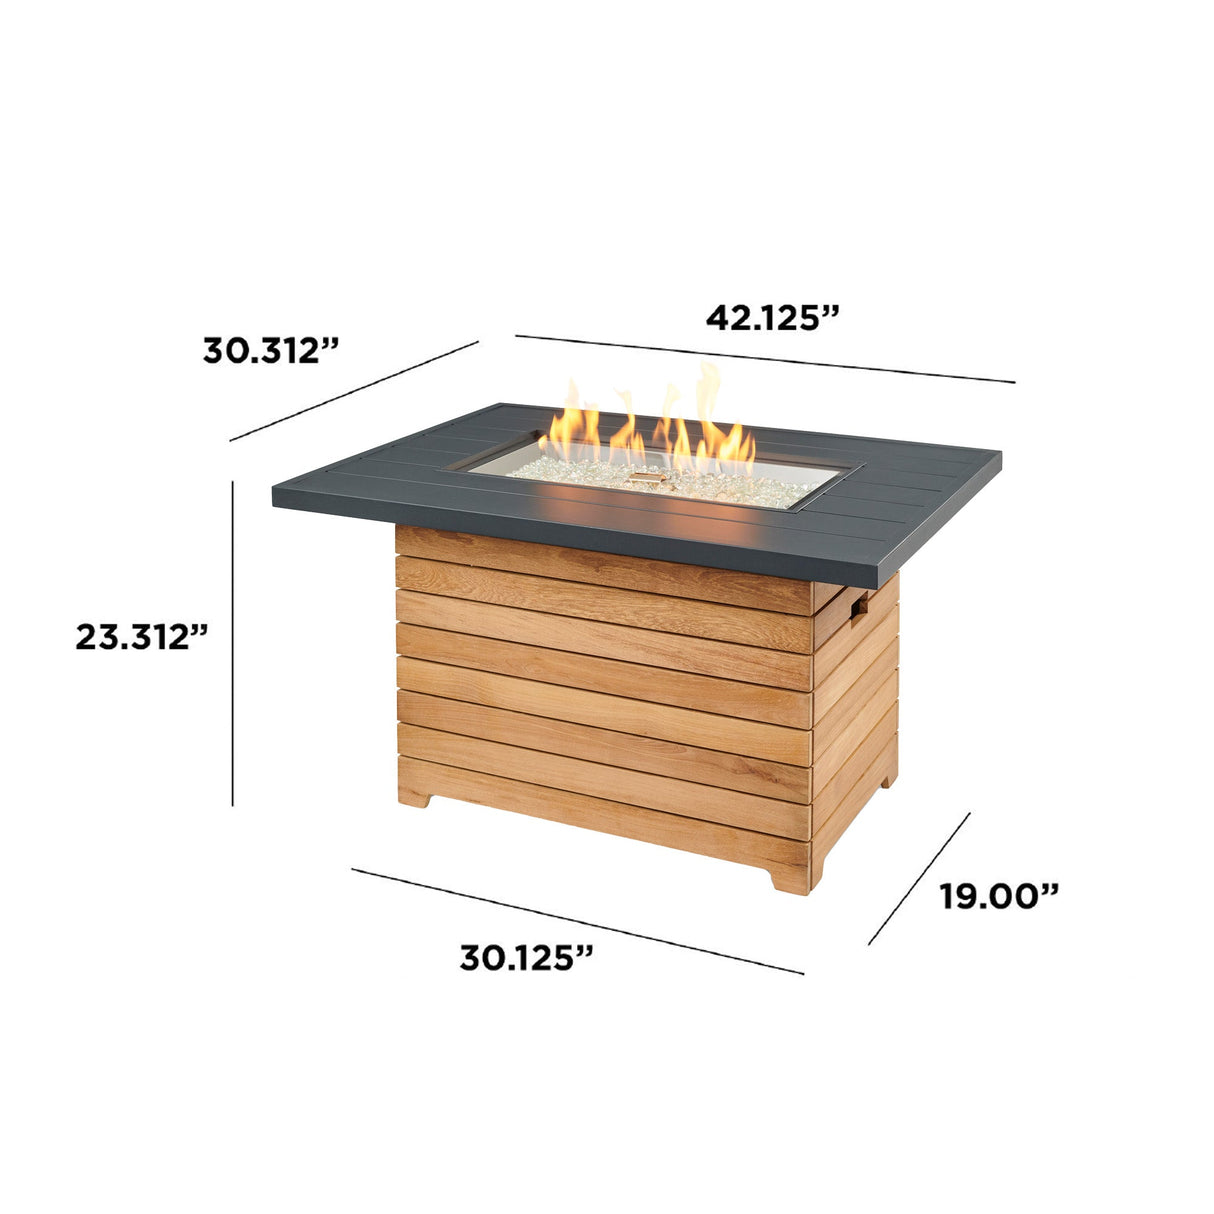 Dimensions overlaid on a Darien Rectangular Gas Fire Pit Table with an Aluminum top